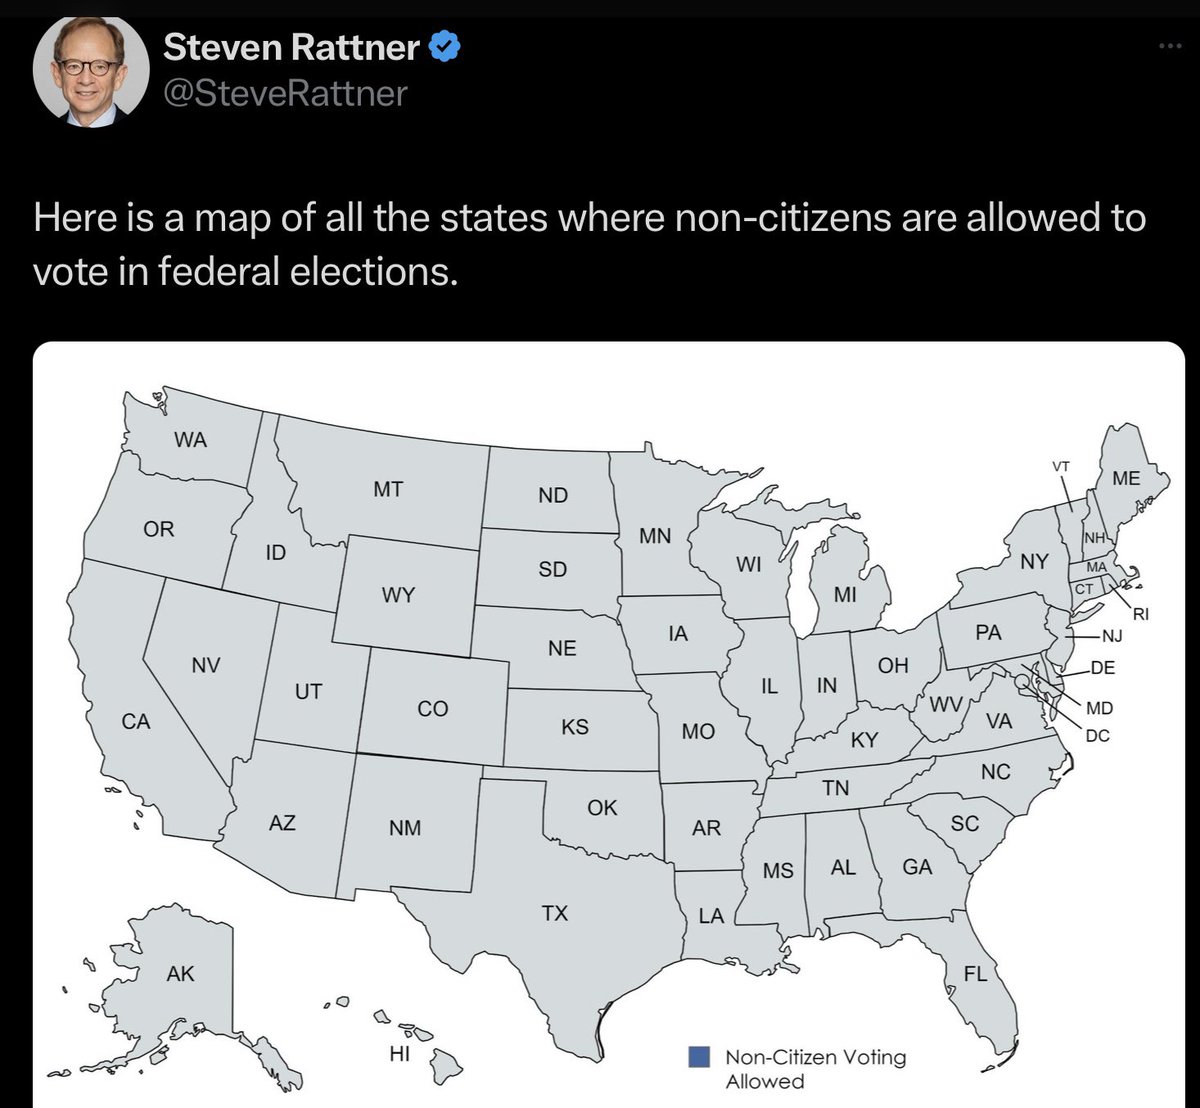 So why is team MAGA proposing laws to stop voting of non-citizens?? Oh, outrage machine right.